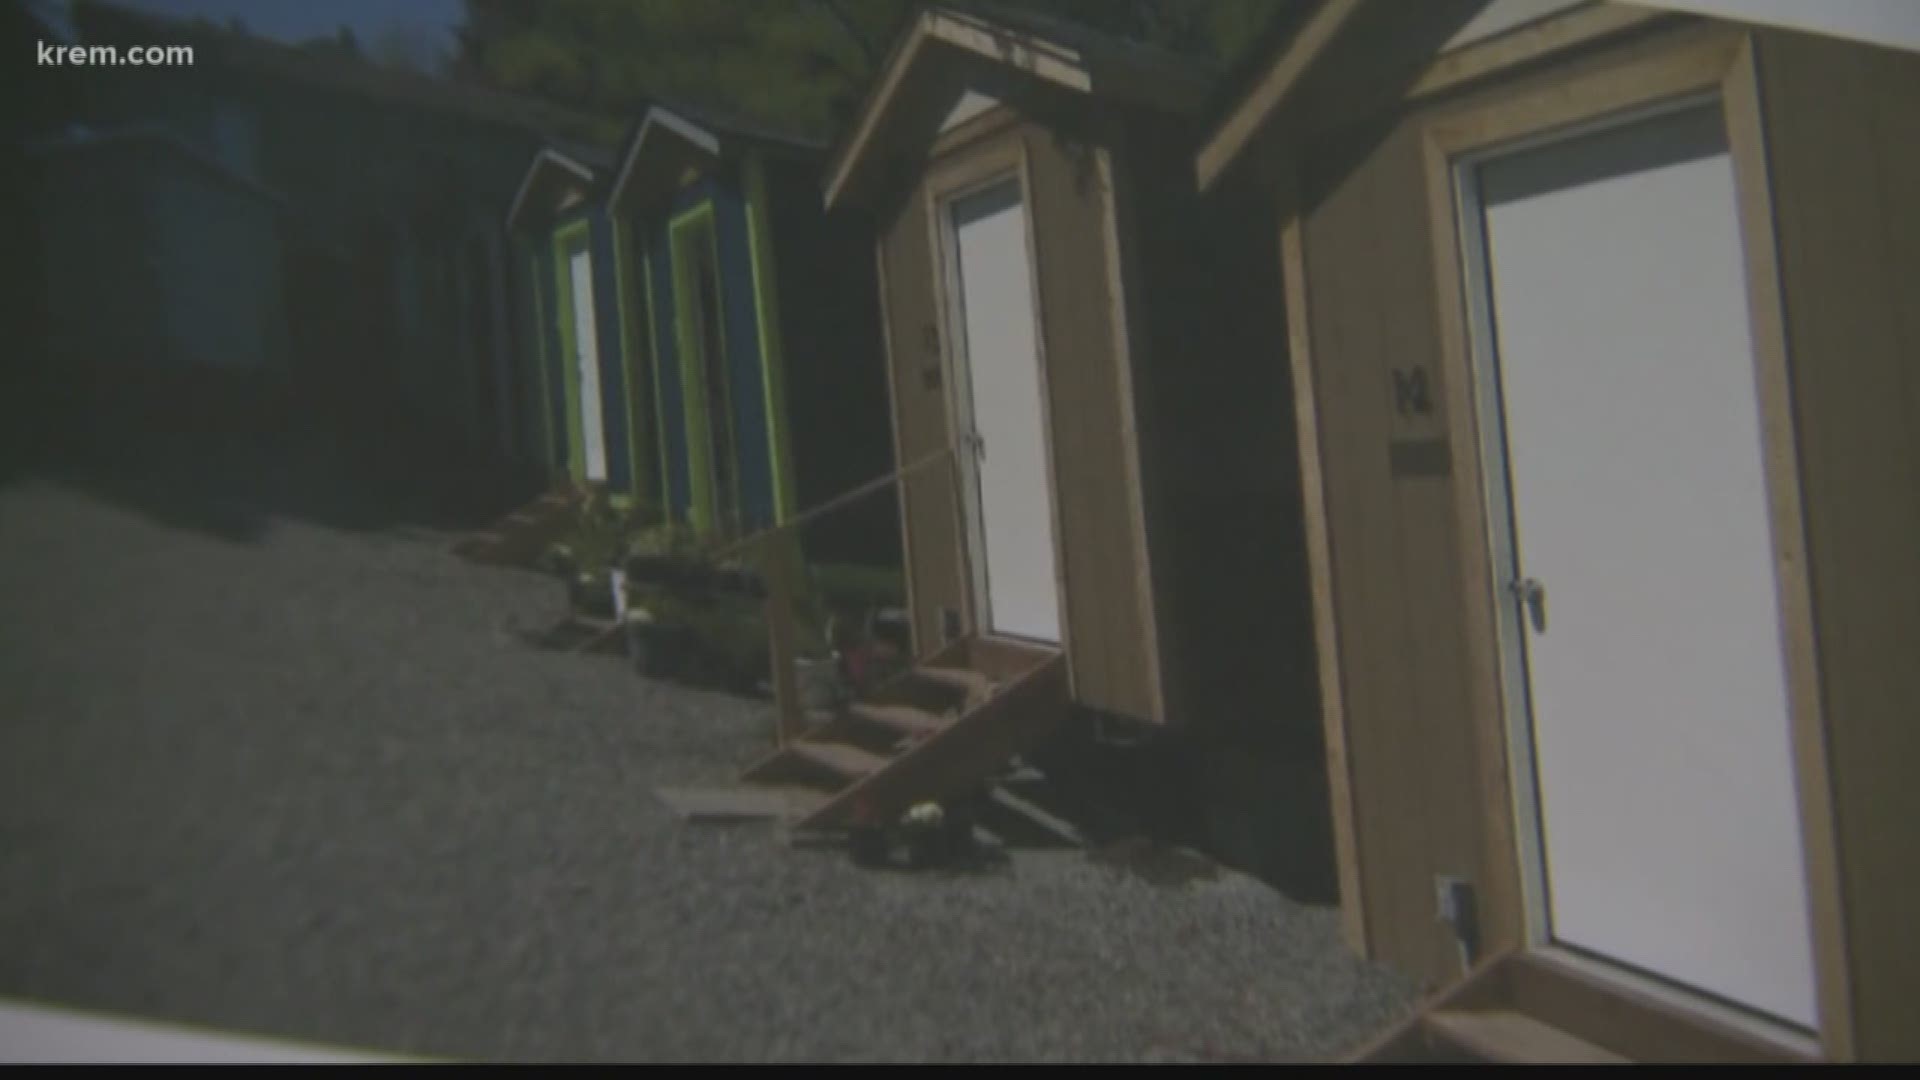 Tiny homes stir up heated discussion in Rathdrum community